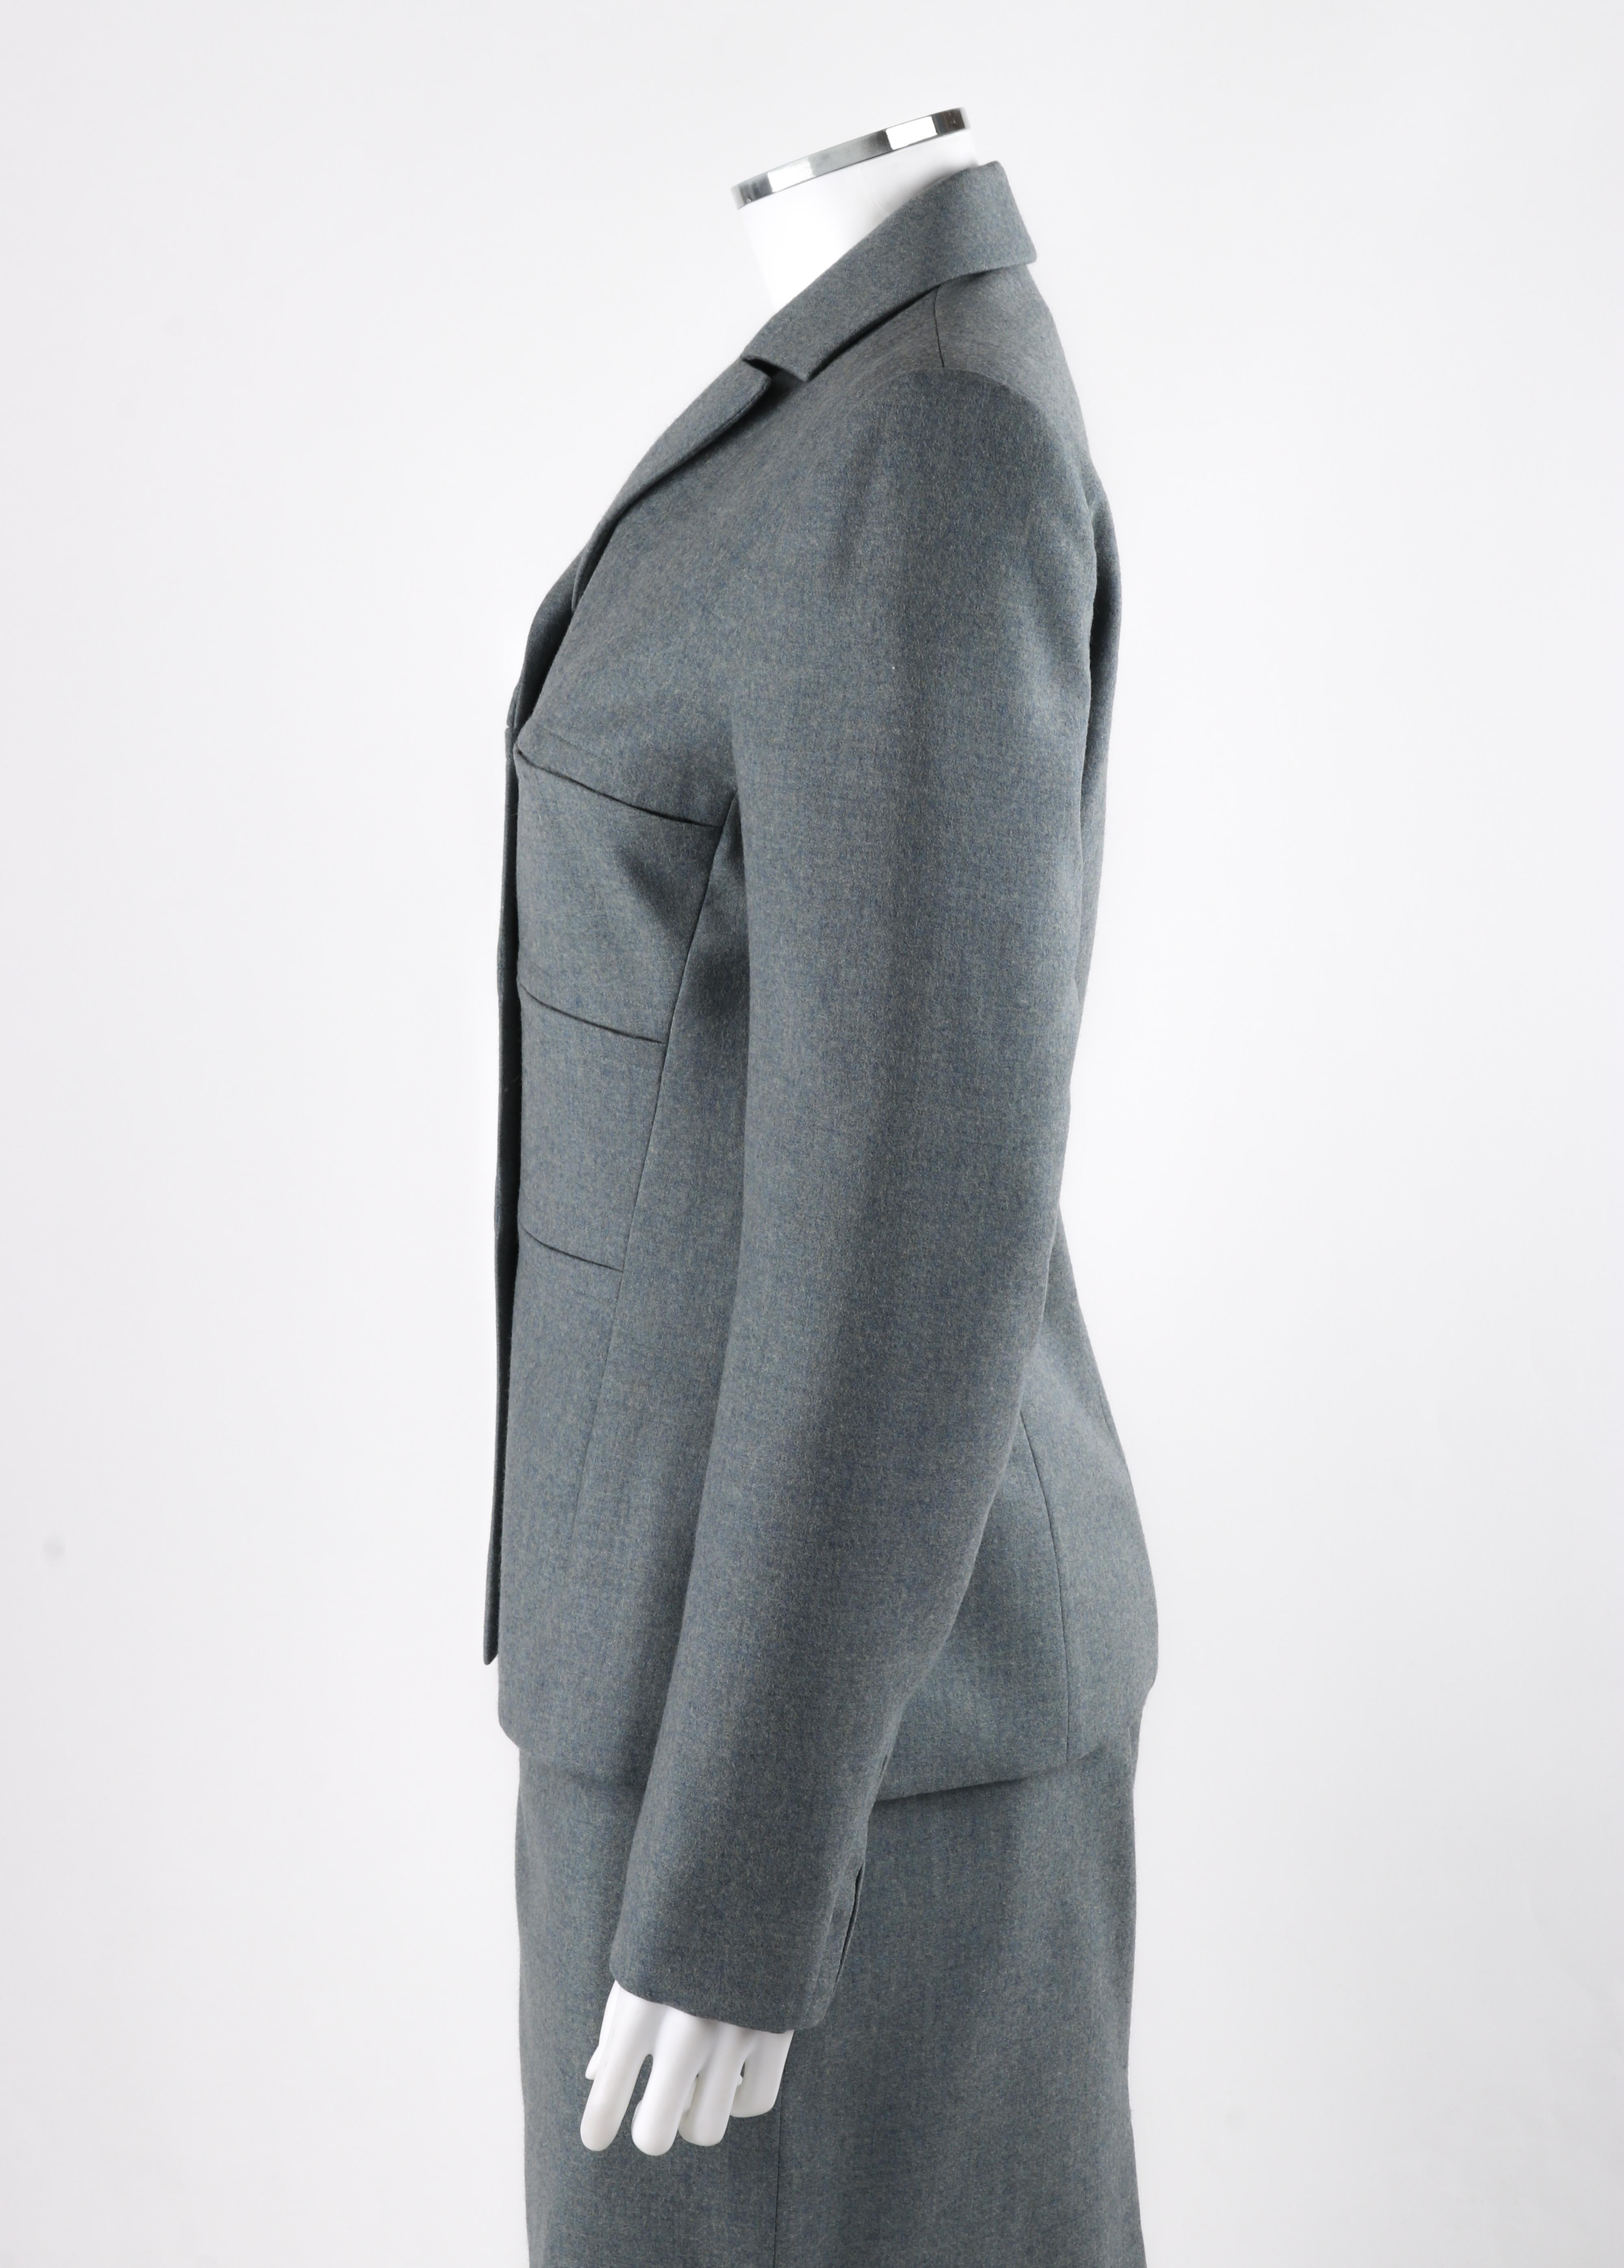 GIVENCHY Couture A/W 1998 ALEXANDER McQUEEN Blue Gray Tailored Blazer Skirt Suit For Sale 1